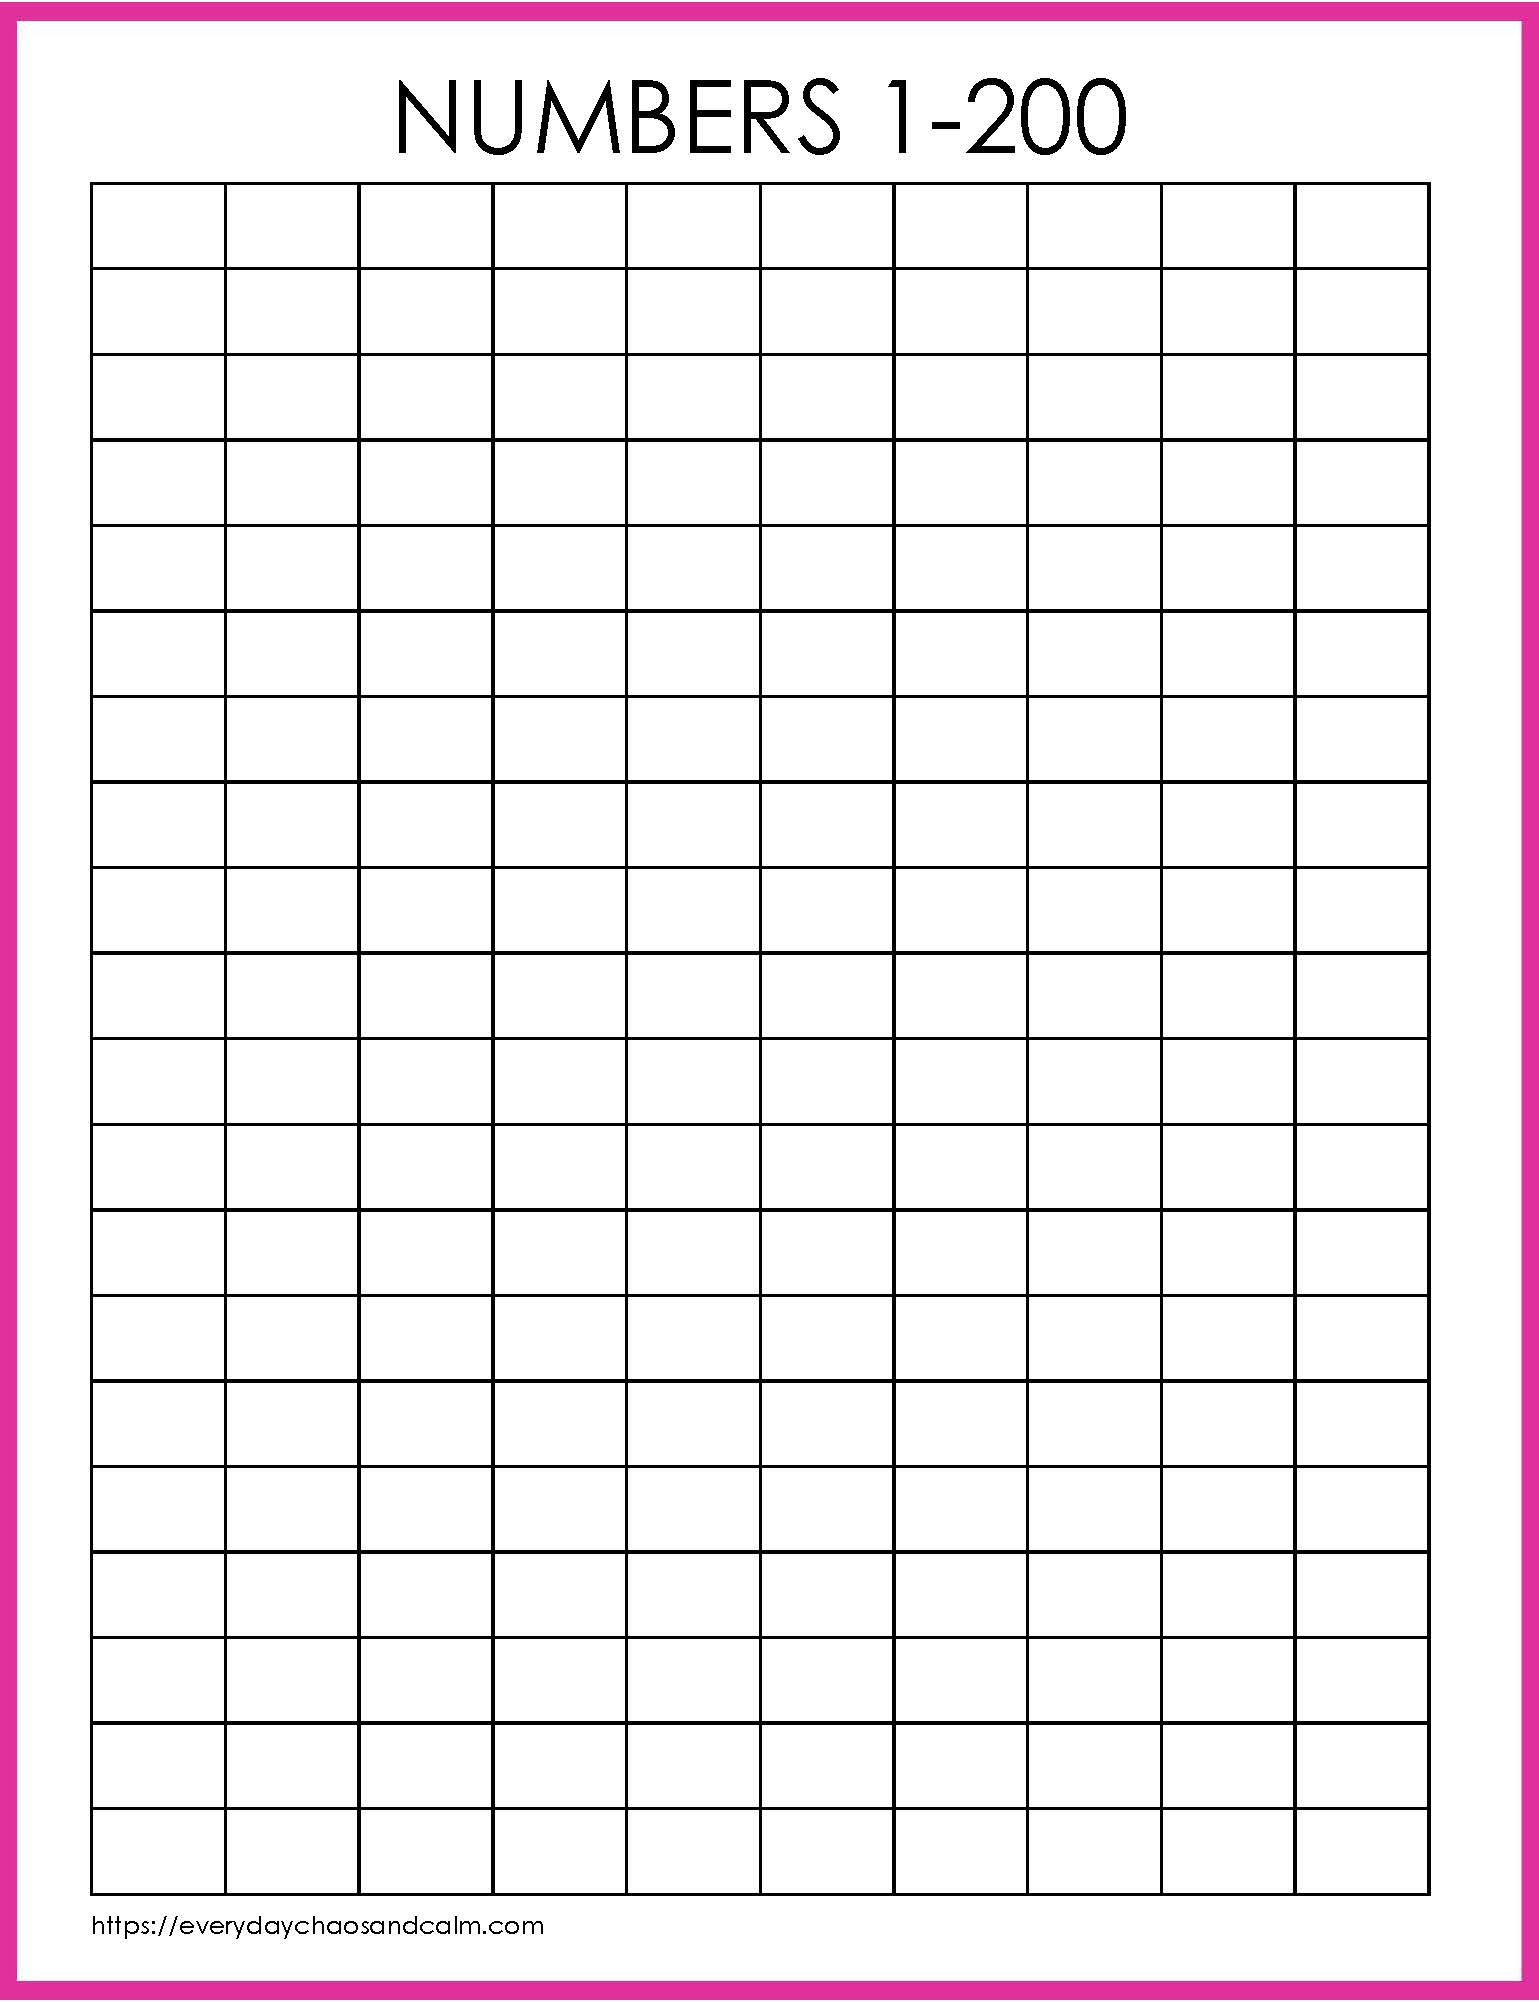  1-200 number Chart with colored border blank